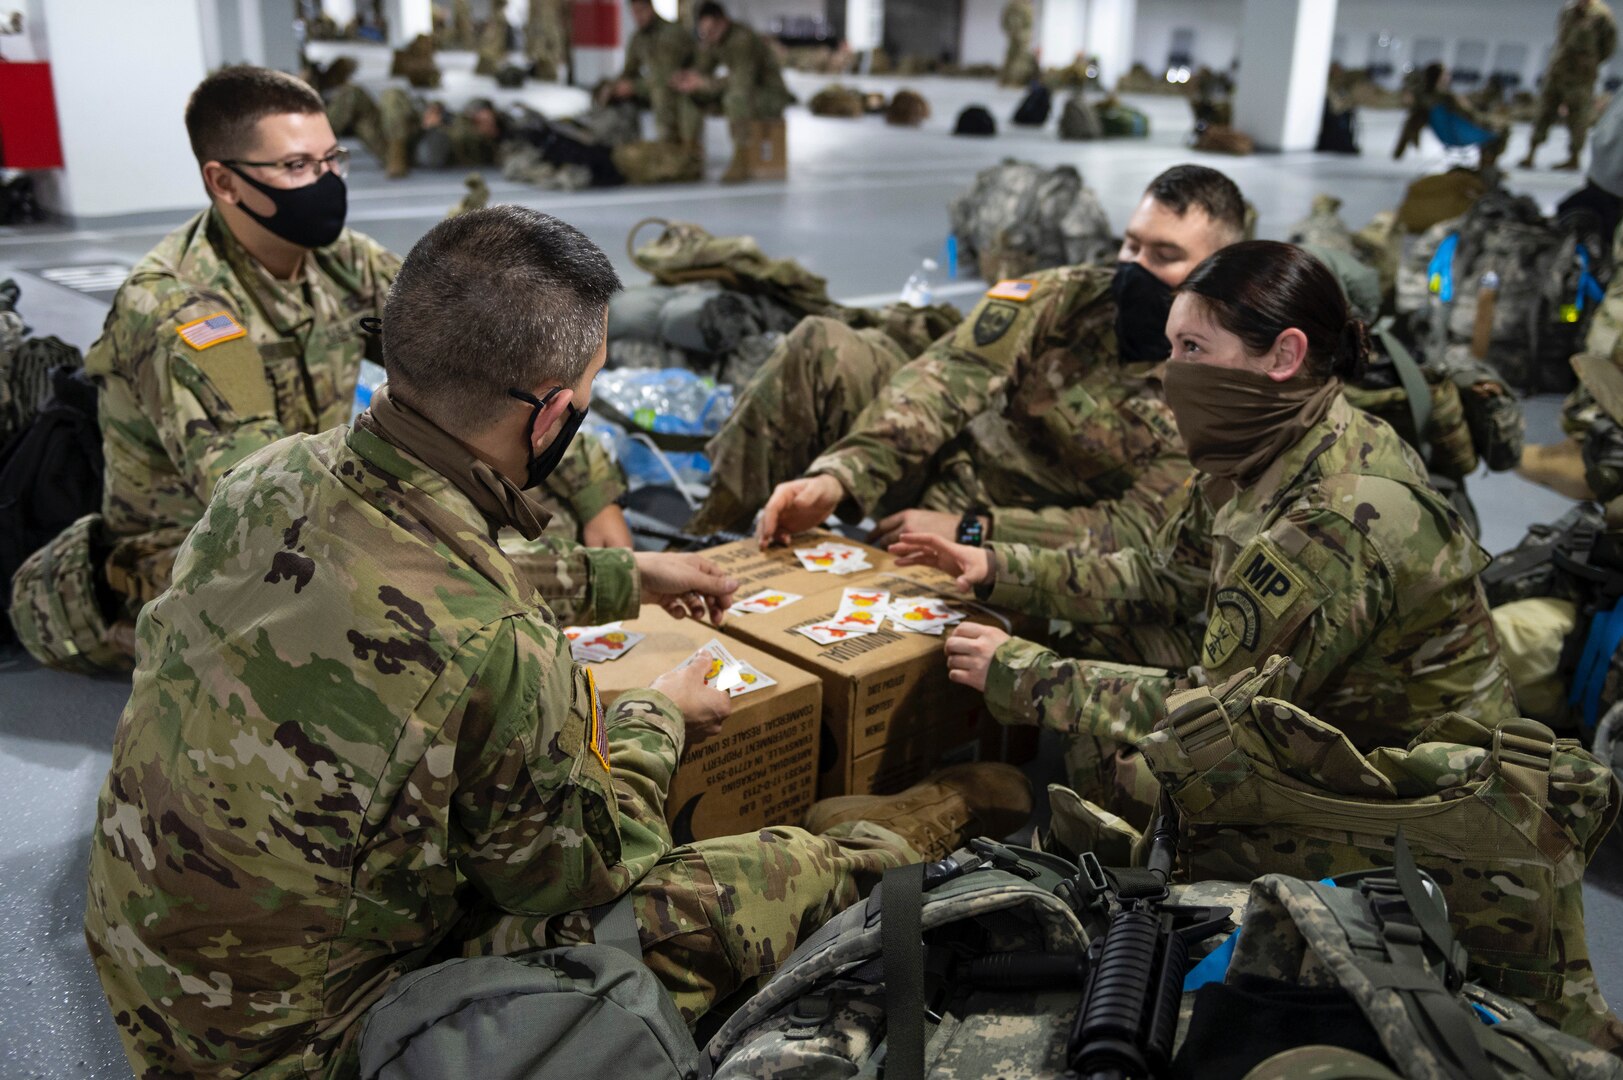 From left: U.S. Army 2nd Lt. Jeremy Wesloh, Sgt. 1st Class Justin Valenti, Sgt. Lucas Zabka, and Staff Sgt. Jessica Fetsch, all with the 191st Military Police Company, North Dakota National Guard, play cards near the U.S. Capitol in Washington Jan. 19, 2021. More than 25,000 National Guard Soldiers and Airmen from throughout the country traveled to Washington to support federal and local authorities for the presidential inauguration. About 7,900 remain in February.